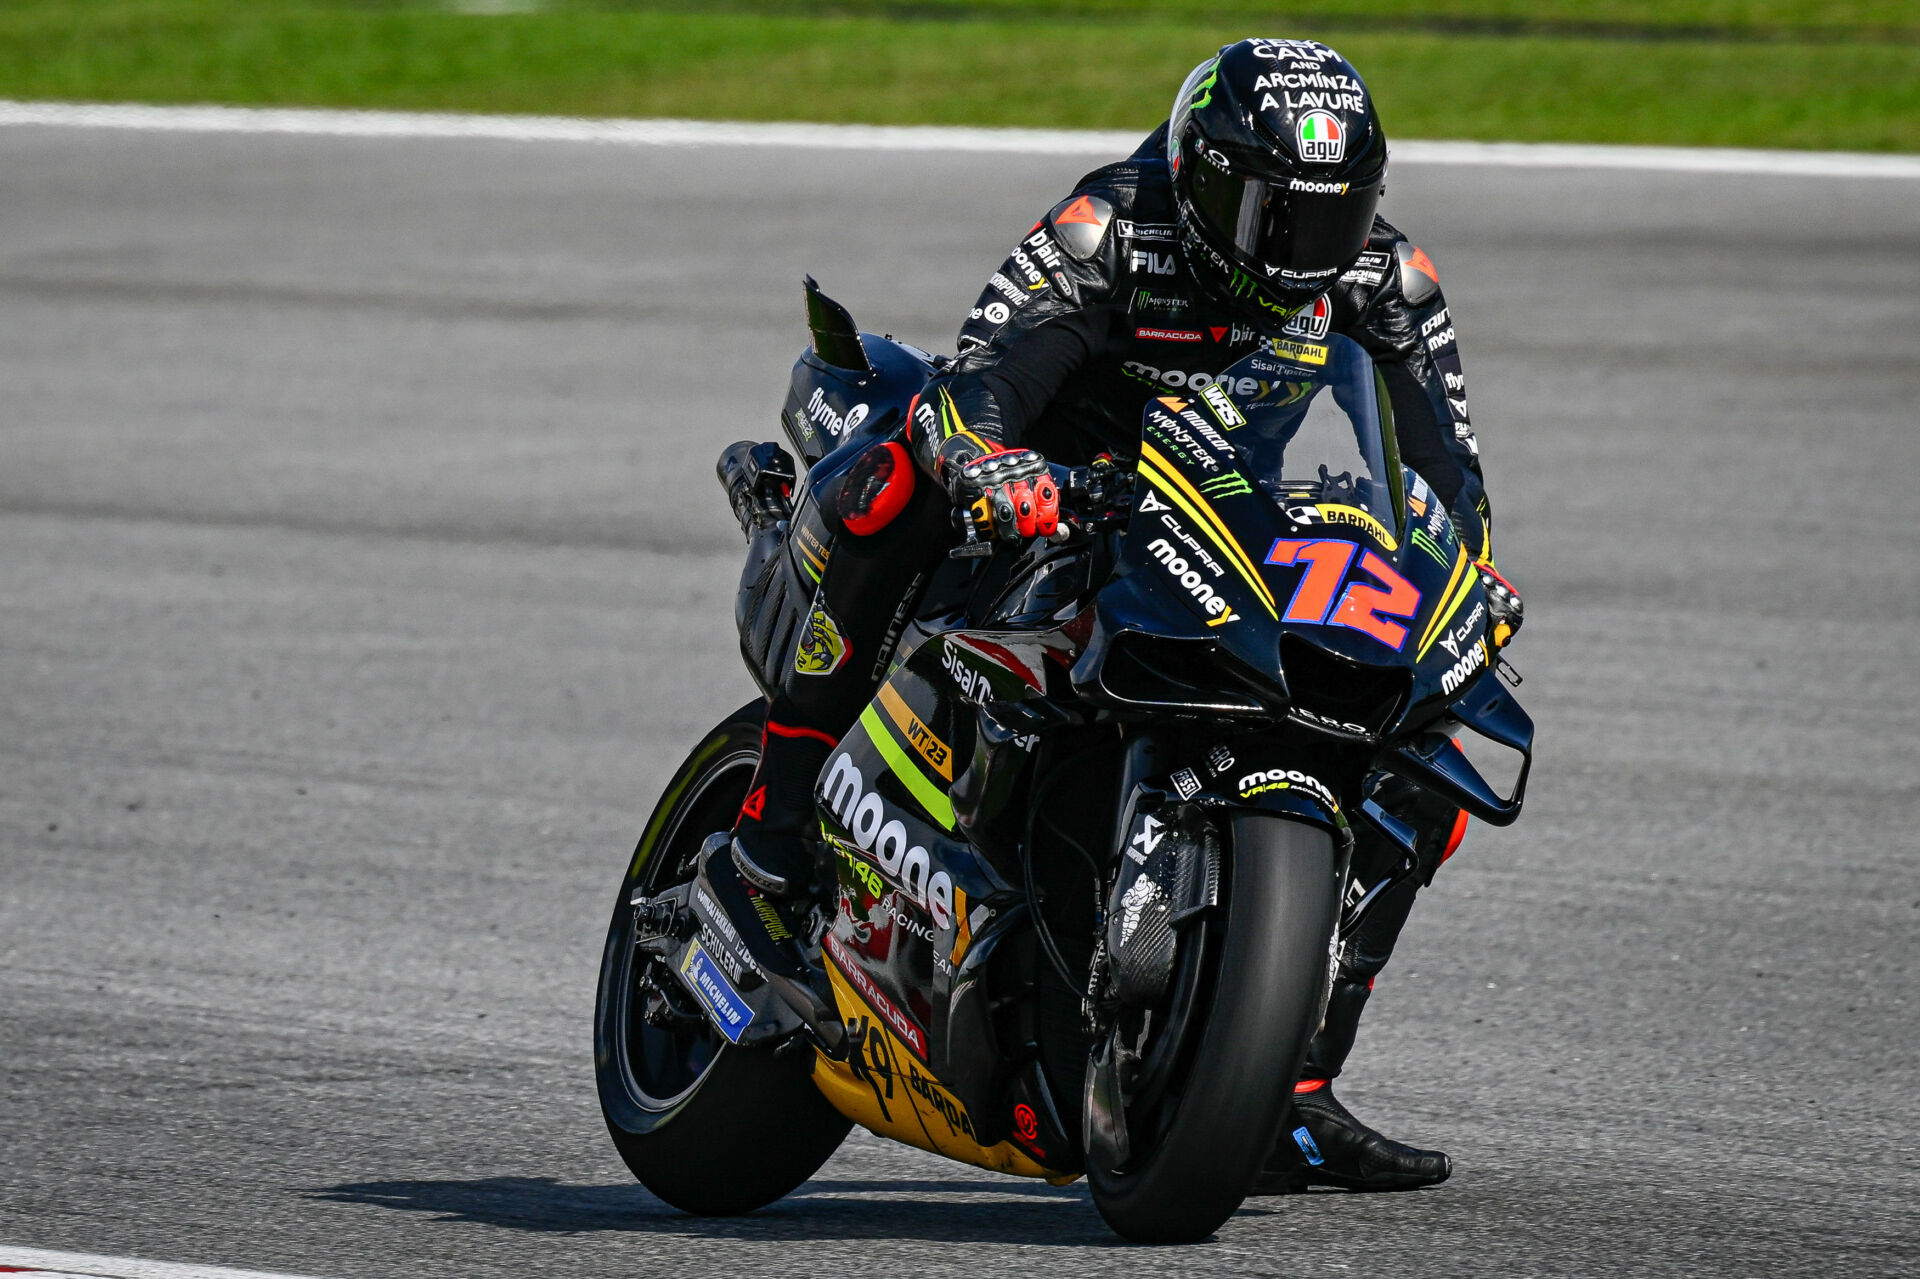 MotoGP Bezzecchi Best On Day One Of Sepang Test (Updated)